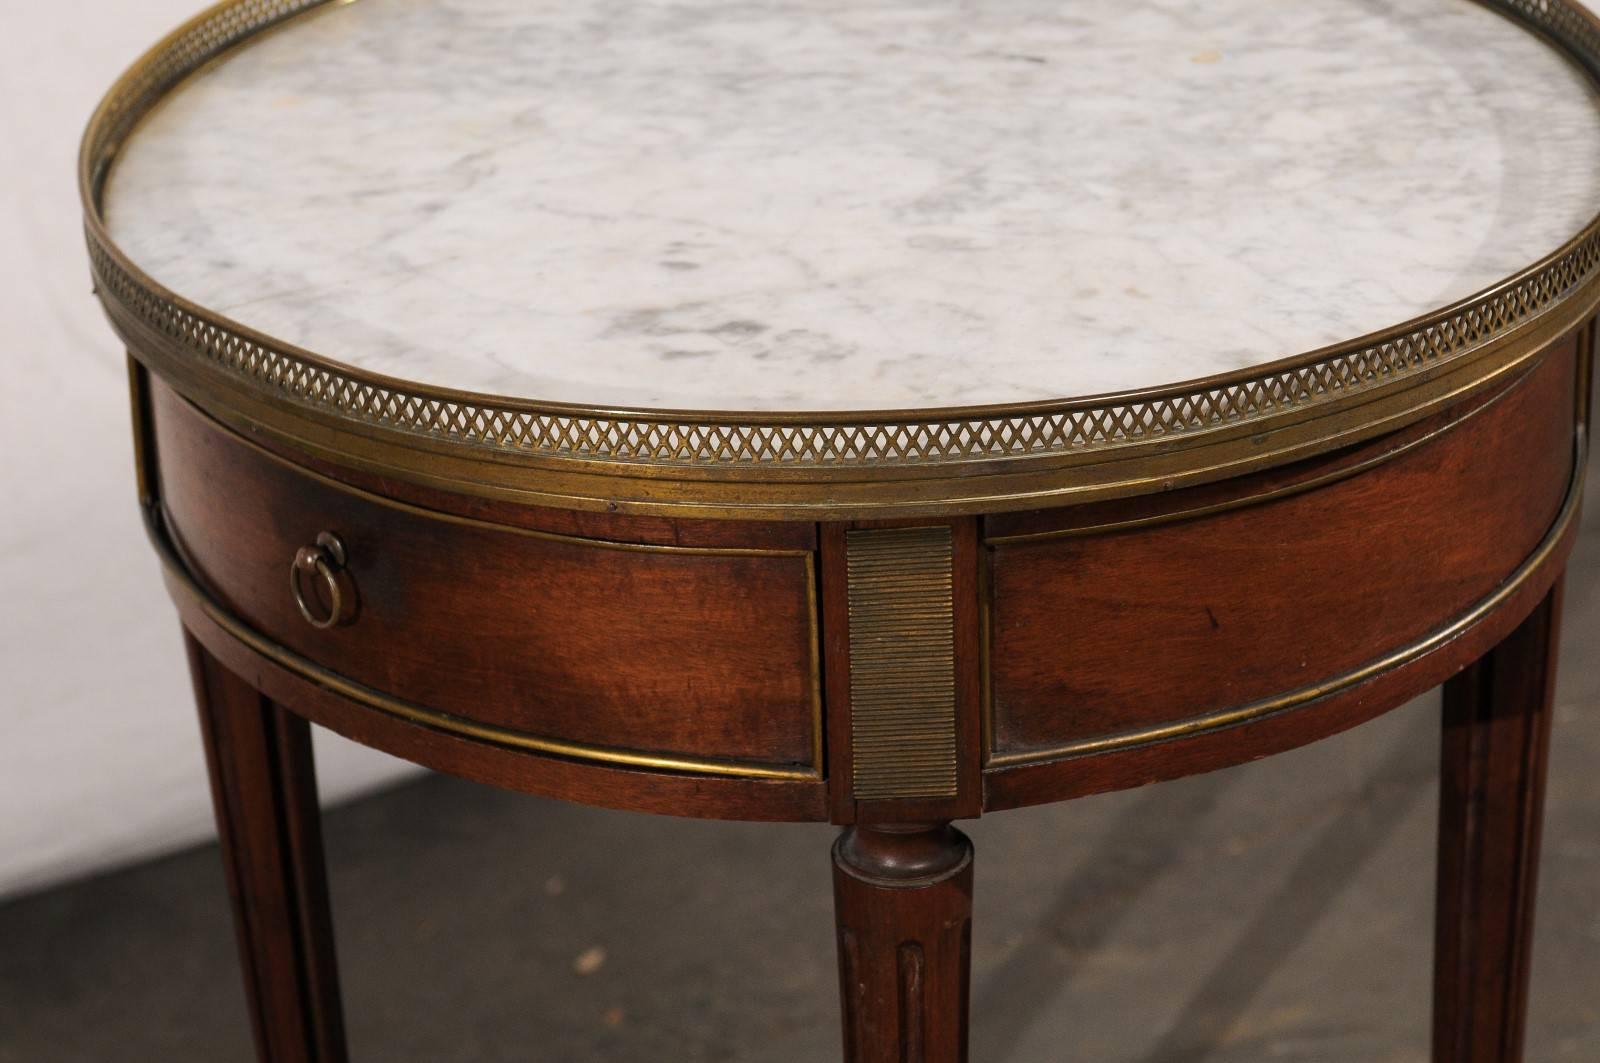 Late 19th century, circa 1890 French walnut marble-top bouillote table.